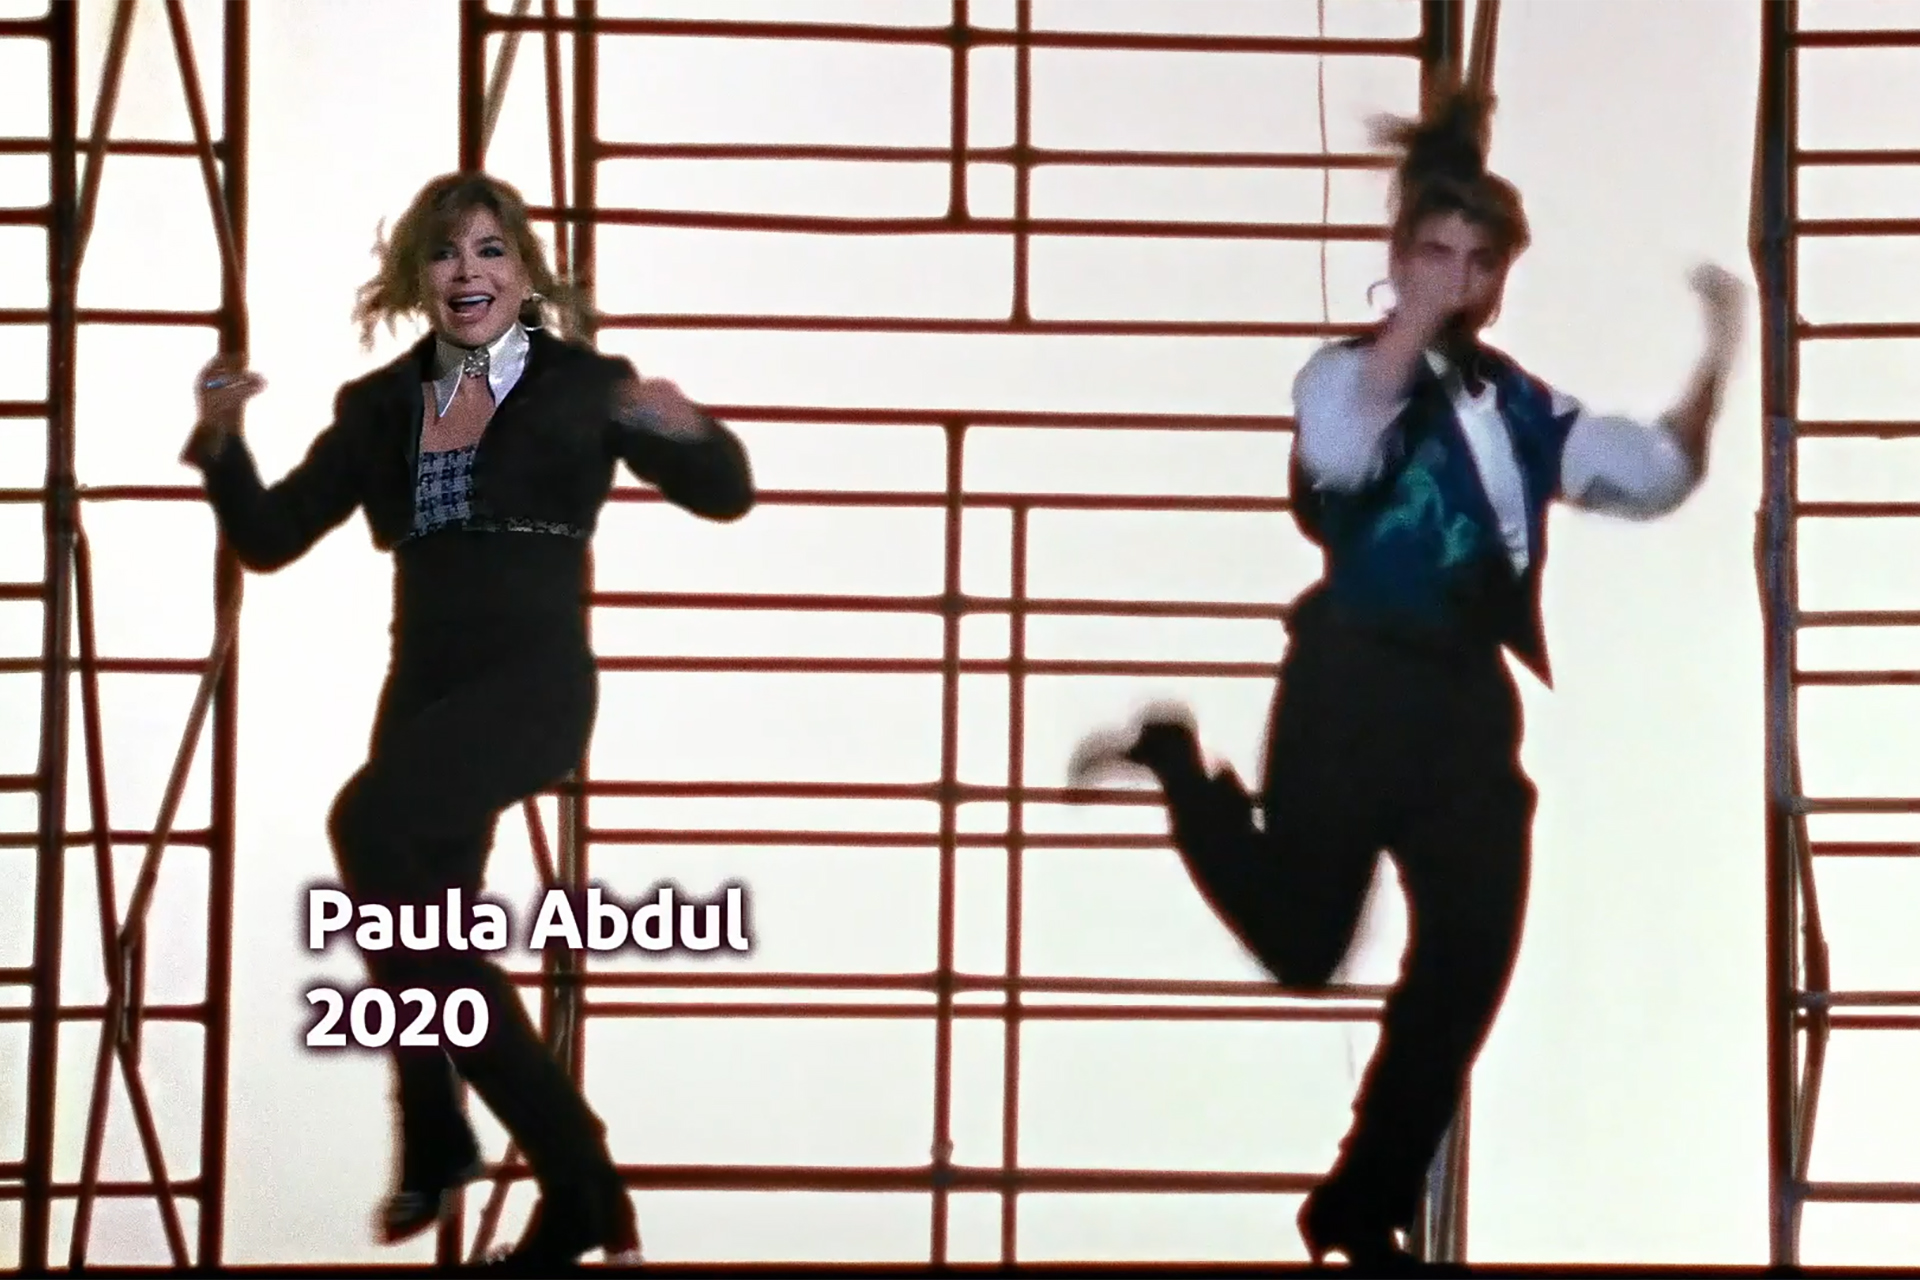 GSK Consumer Healthcare teams up with Paula Abdul for the launch of Voltaren Arthritis Pain Gel